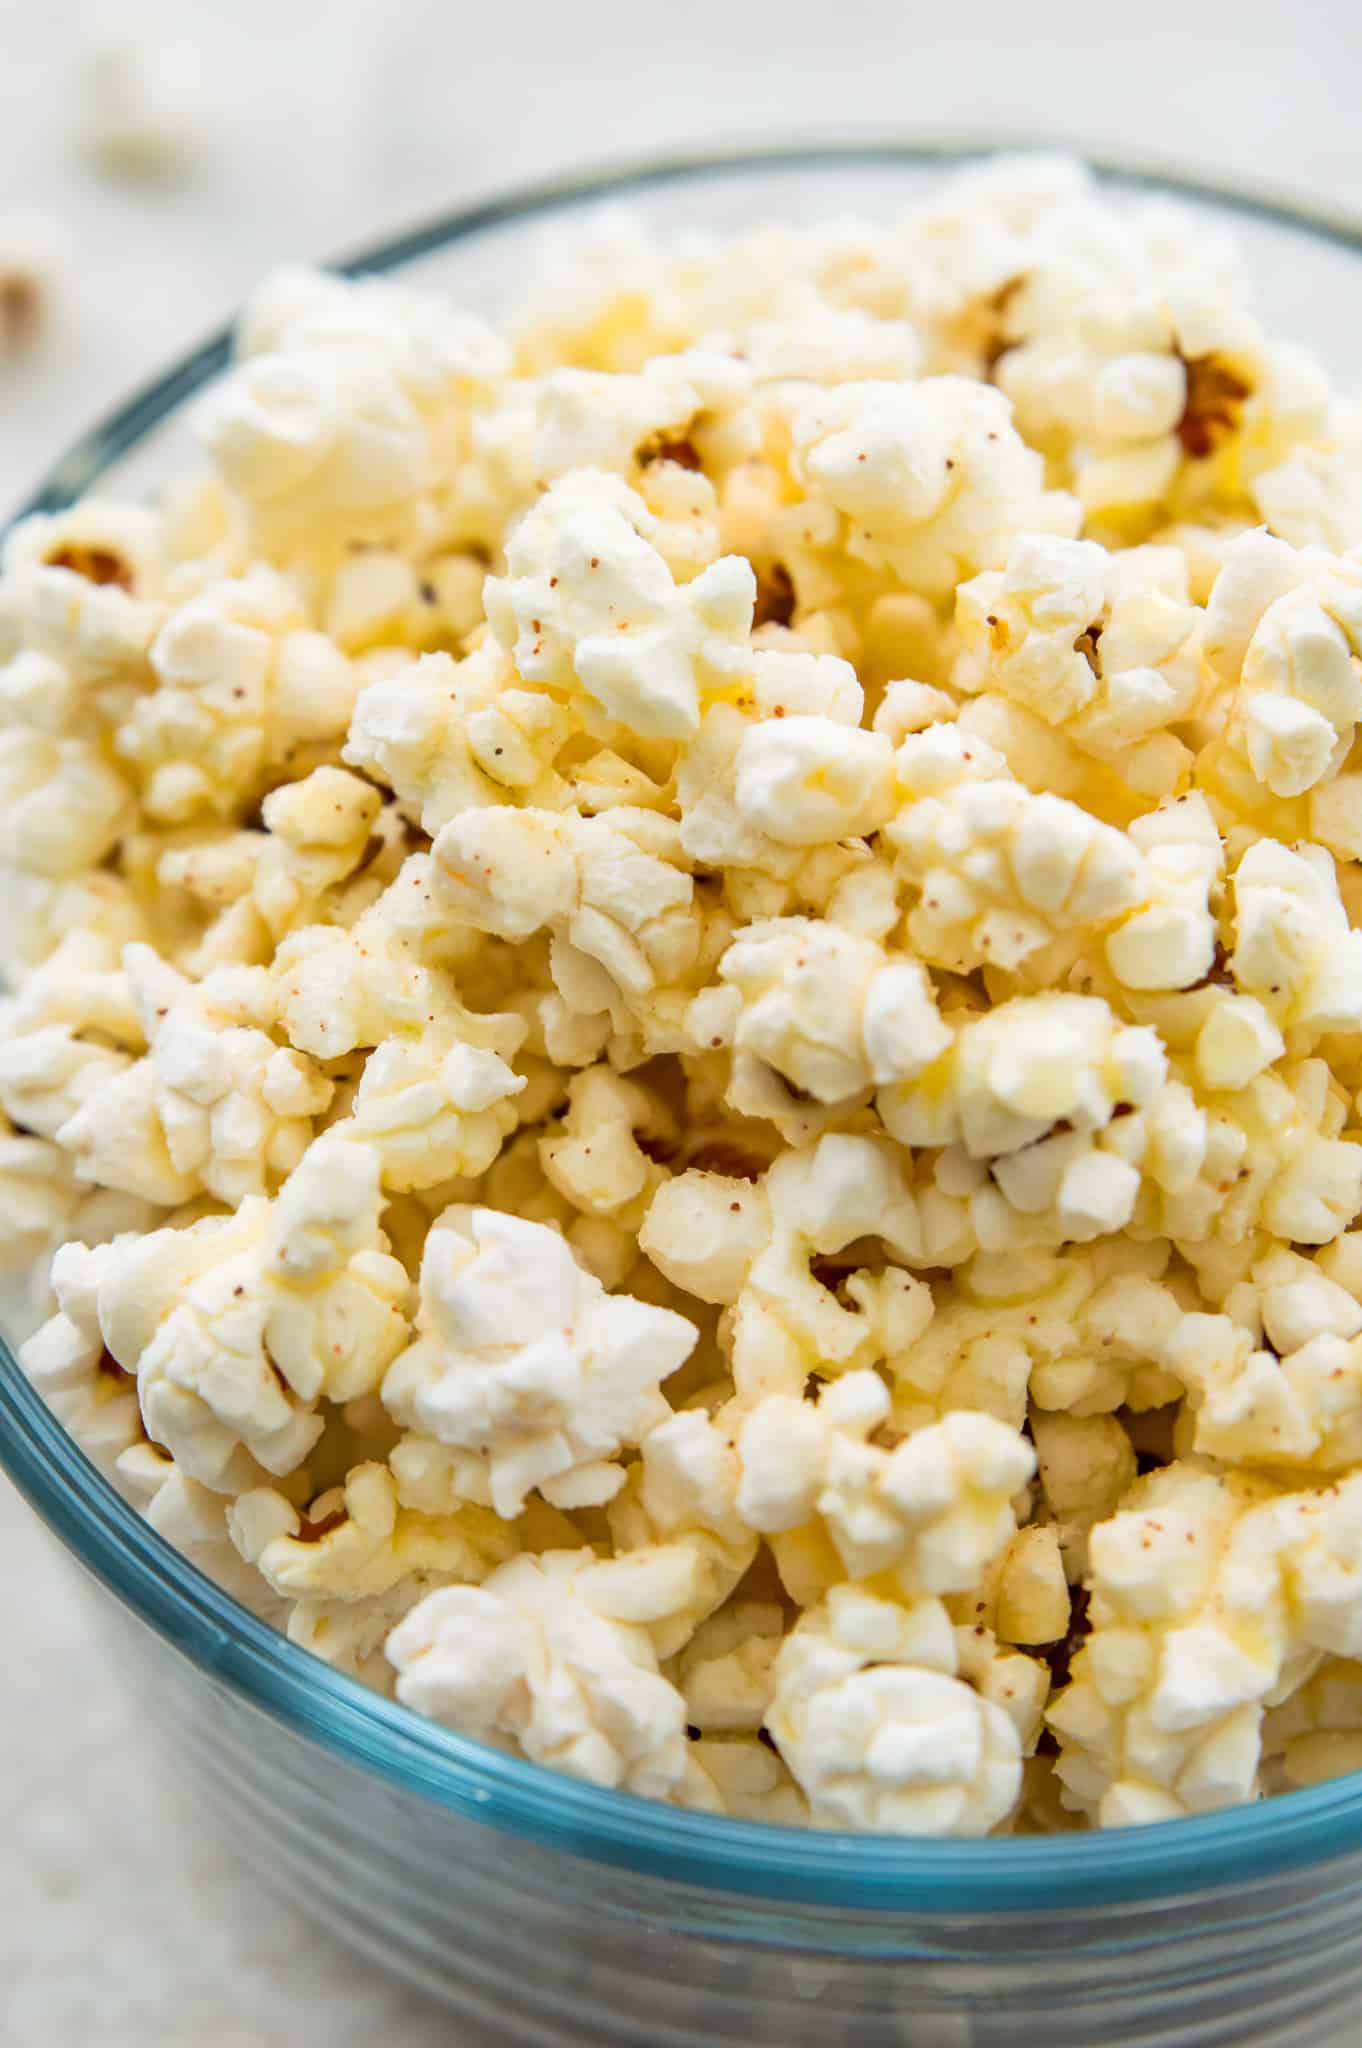 A large bowl of popcorn made in the air fryer.